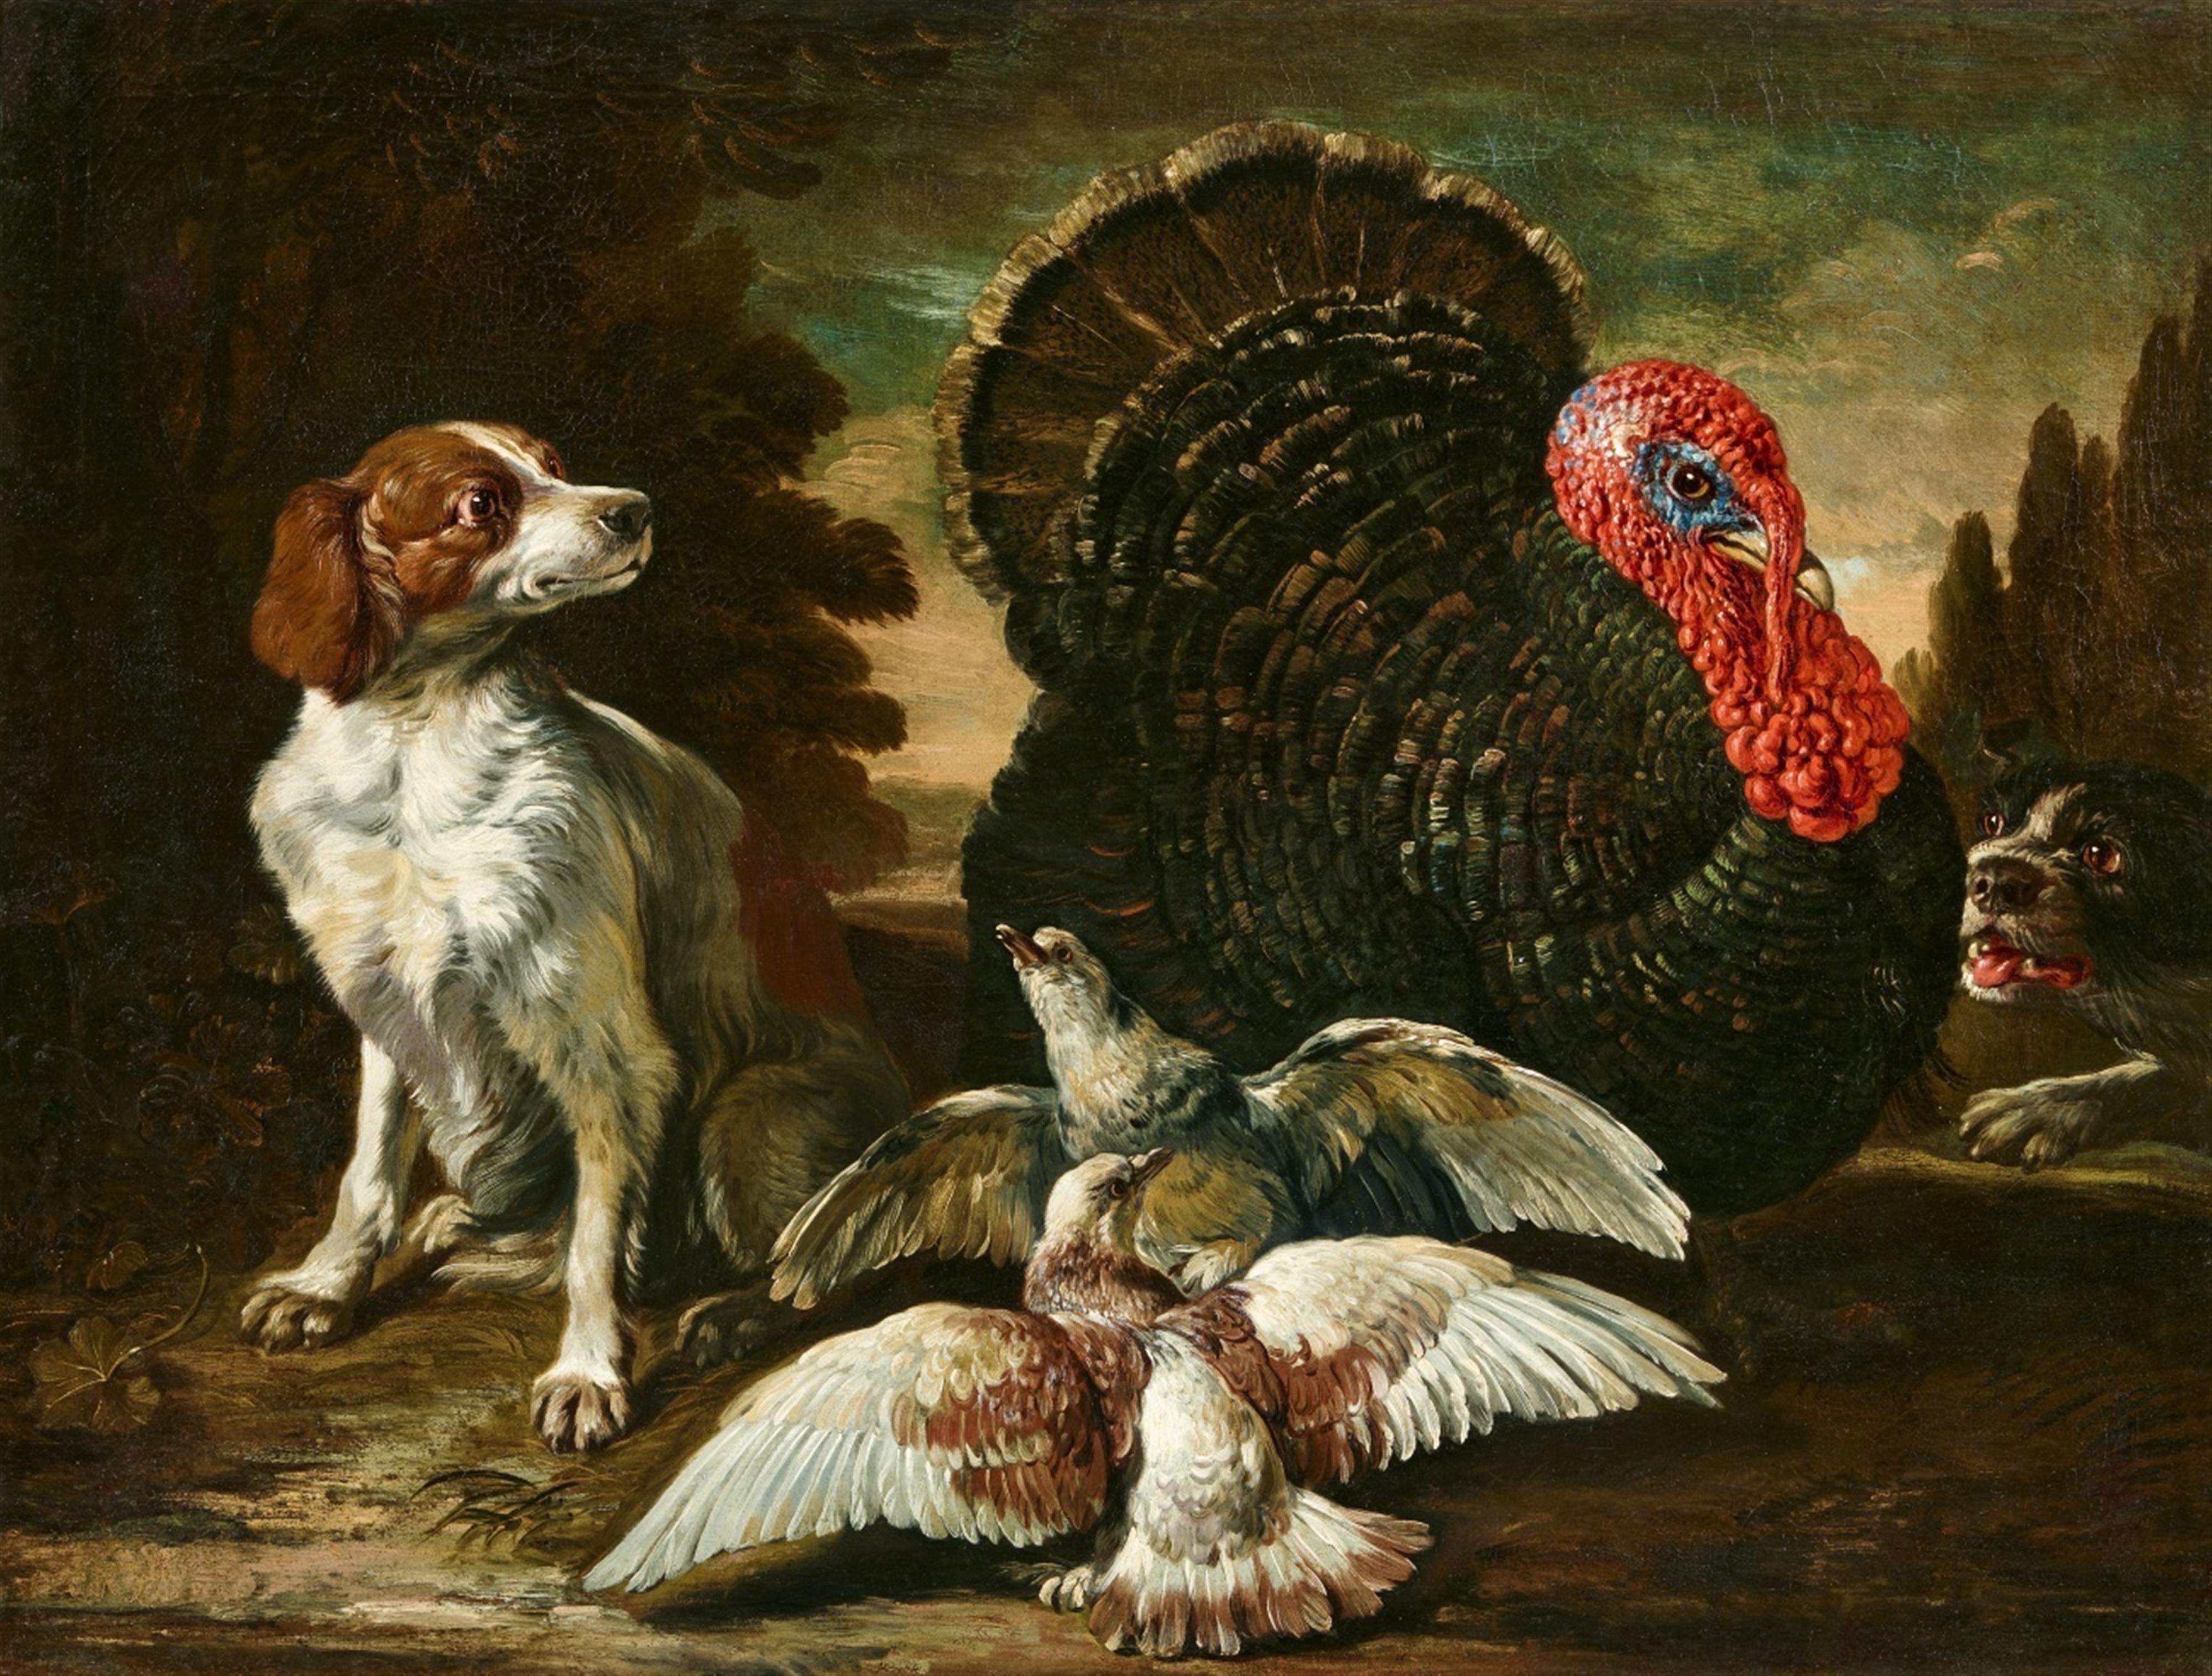 David de Coninck - A Turkey, Two Dogs and Two Pigeons in Front of a Landscape
A Peacock, Two Chickens and Two Rabbits in Front of a Landscape - image-1